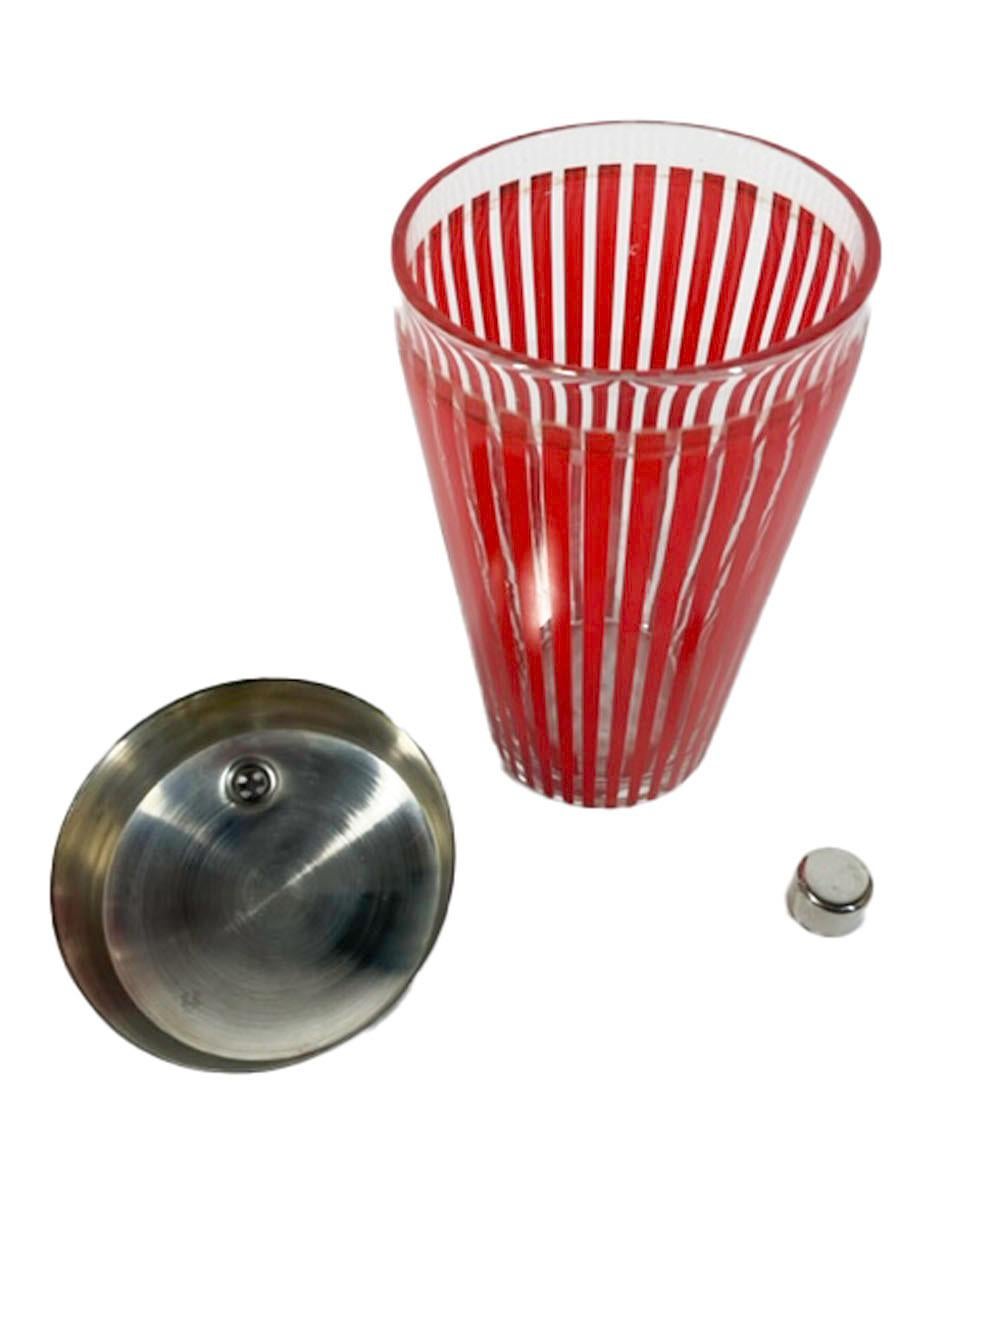 20th Century Art Deco Cocktail Shaker with Chrome Lid, Decorated with Vertical Red Stripes